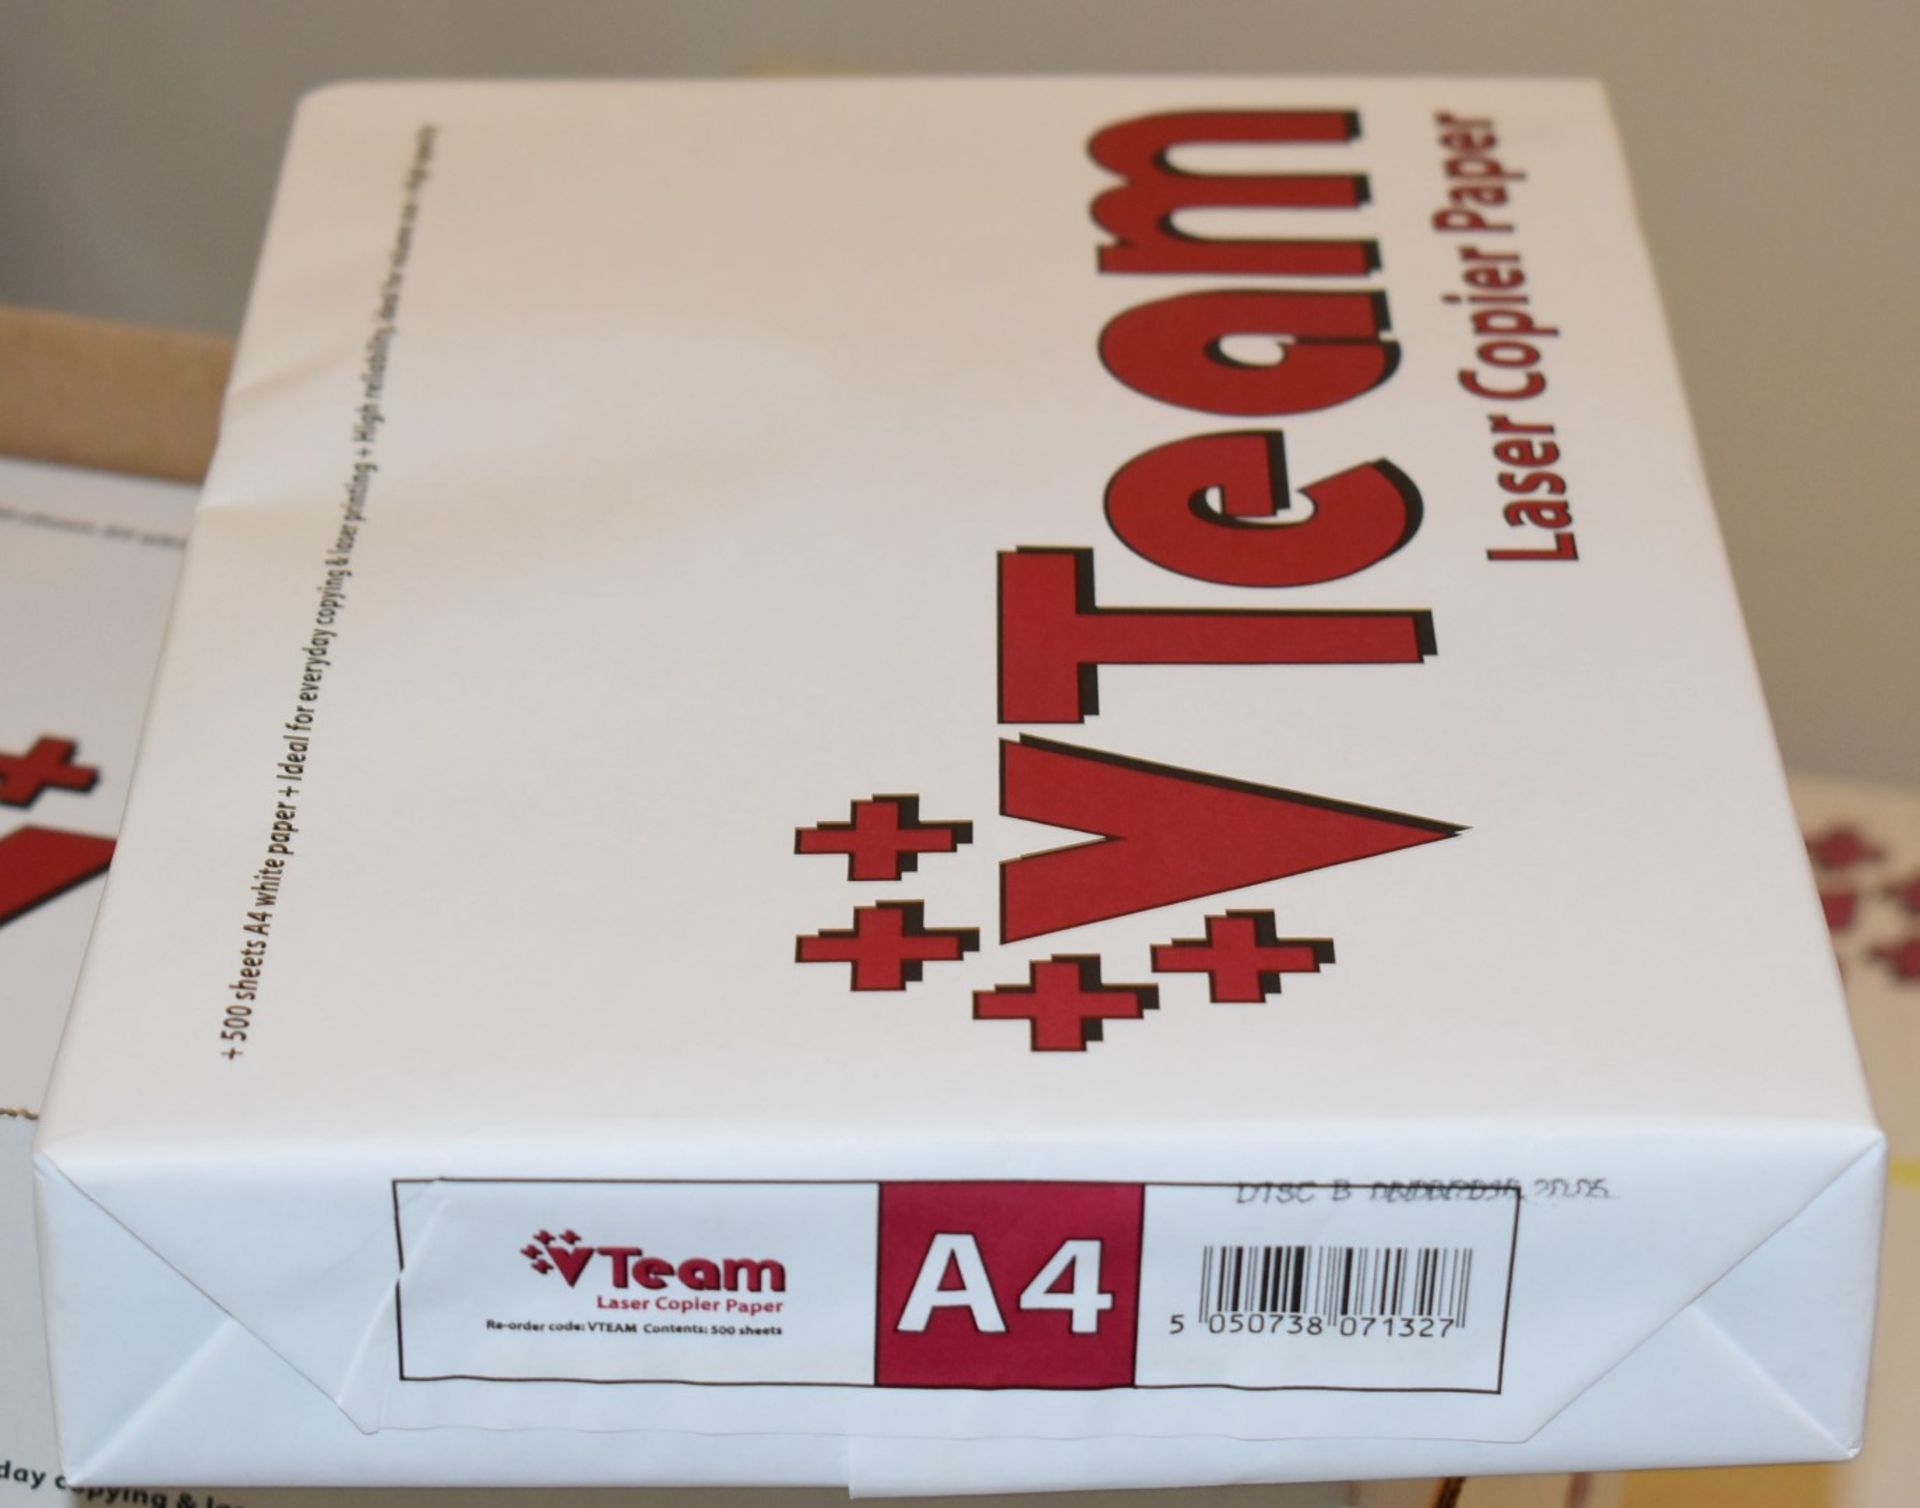 10 x Packs of Vteam A4 Laser Copy Paper - 500 Sheets Per Pack - Includes 2 x Boxes of 5 x Reams - Image 6 of 6